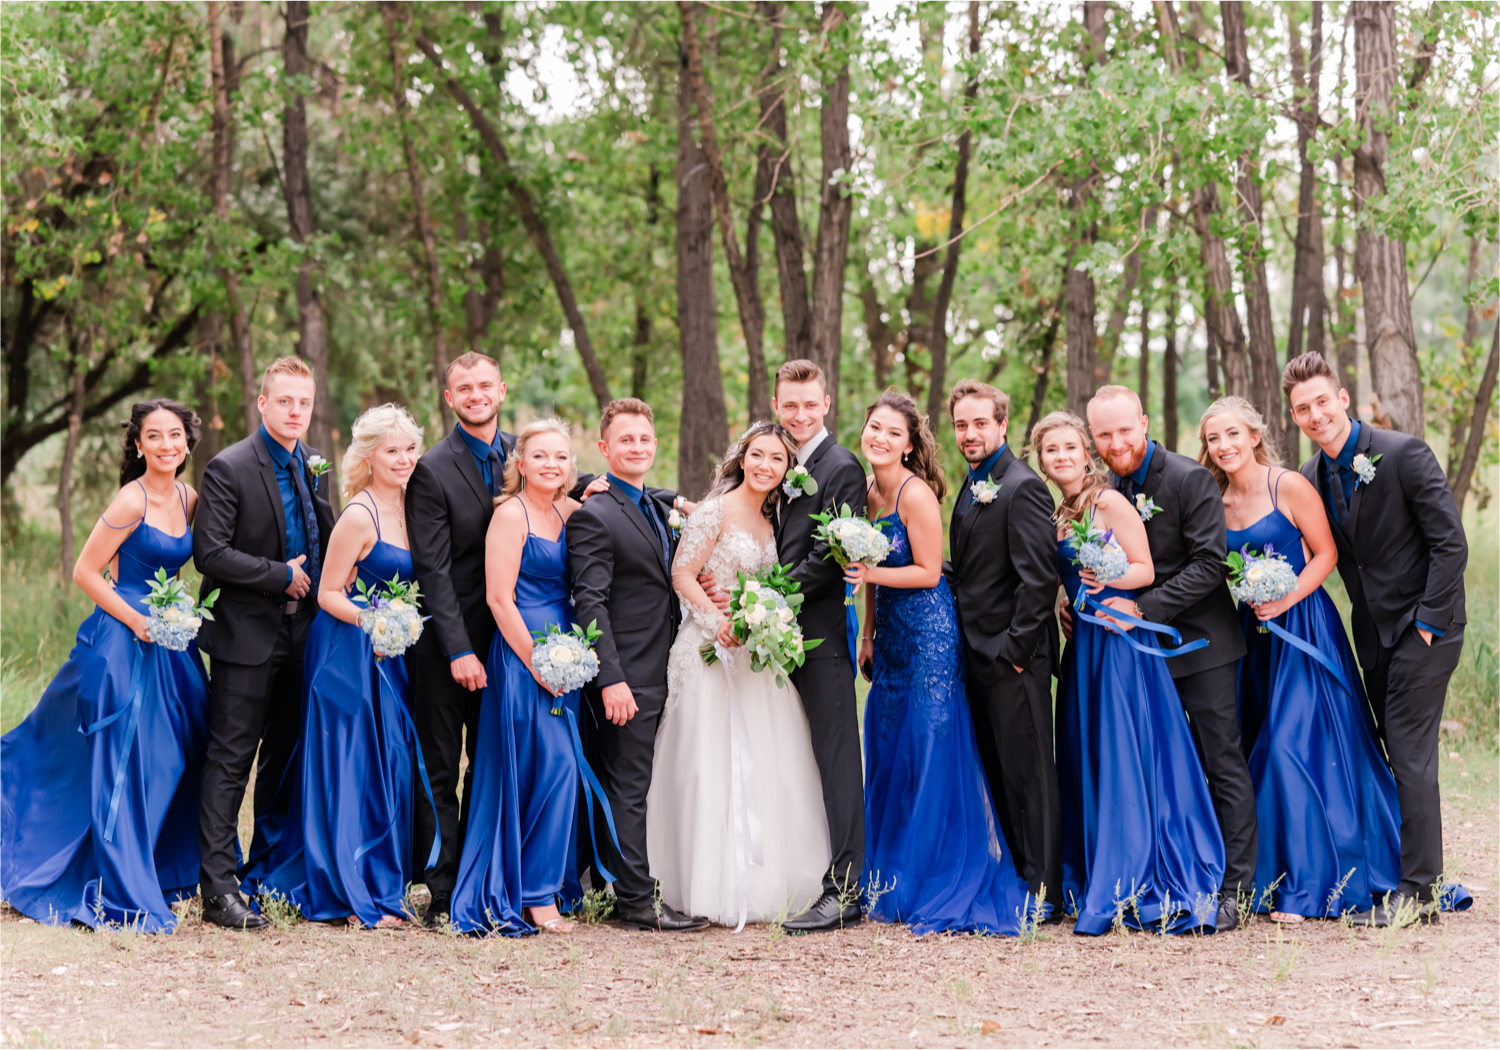 Romantic and Rustic Wedding at The Mill in Windsor | Britni Girard Photography | Colorado based wedding photography and videography team | Royal Blue and White Bridal Party